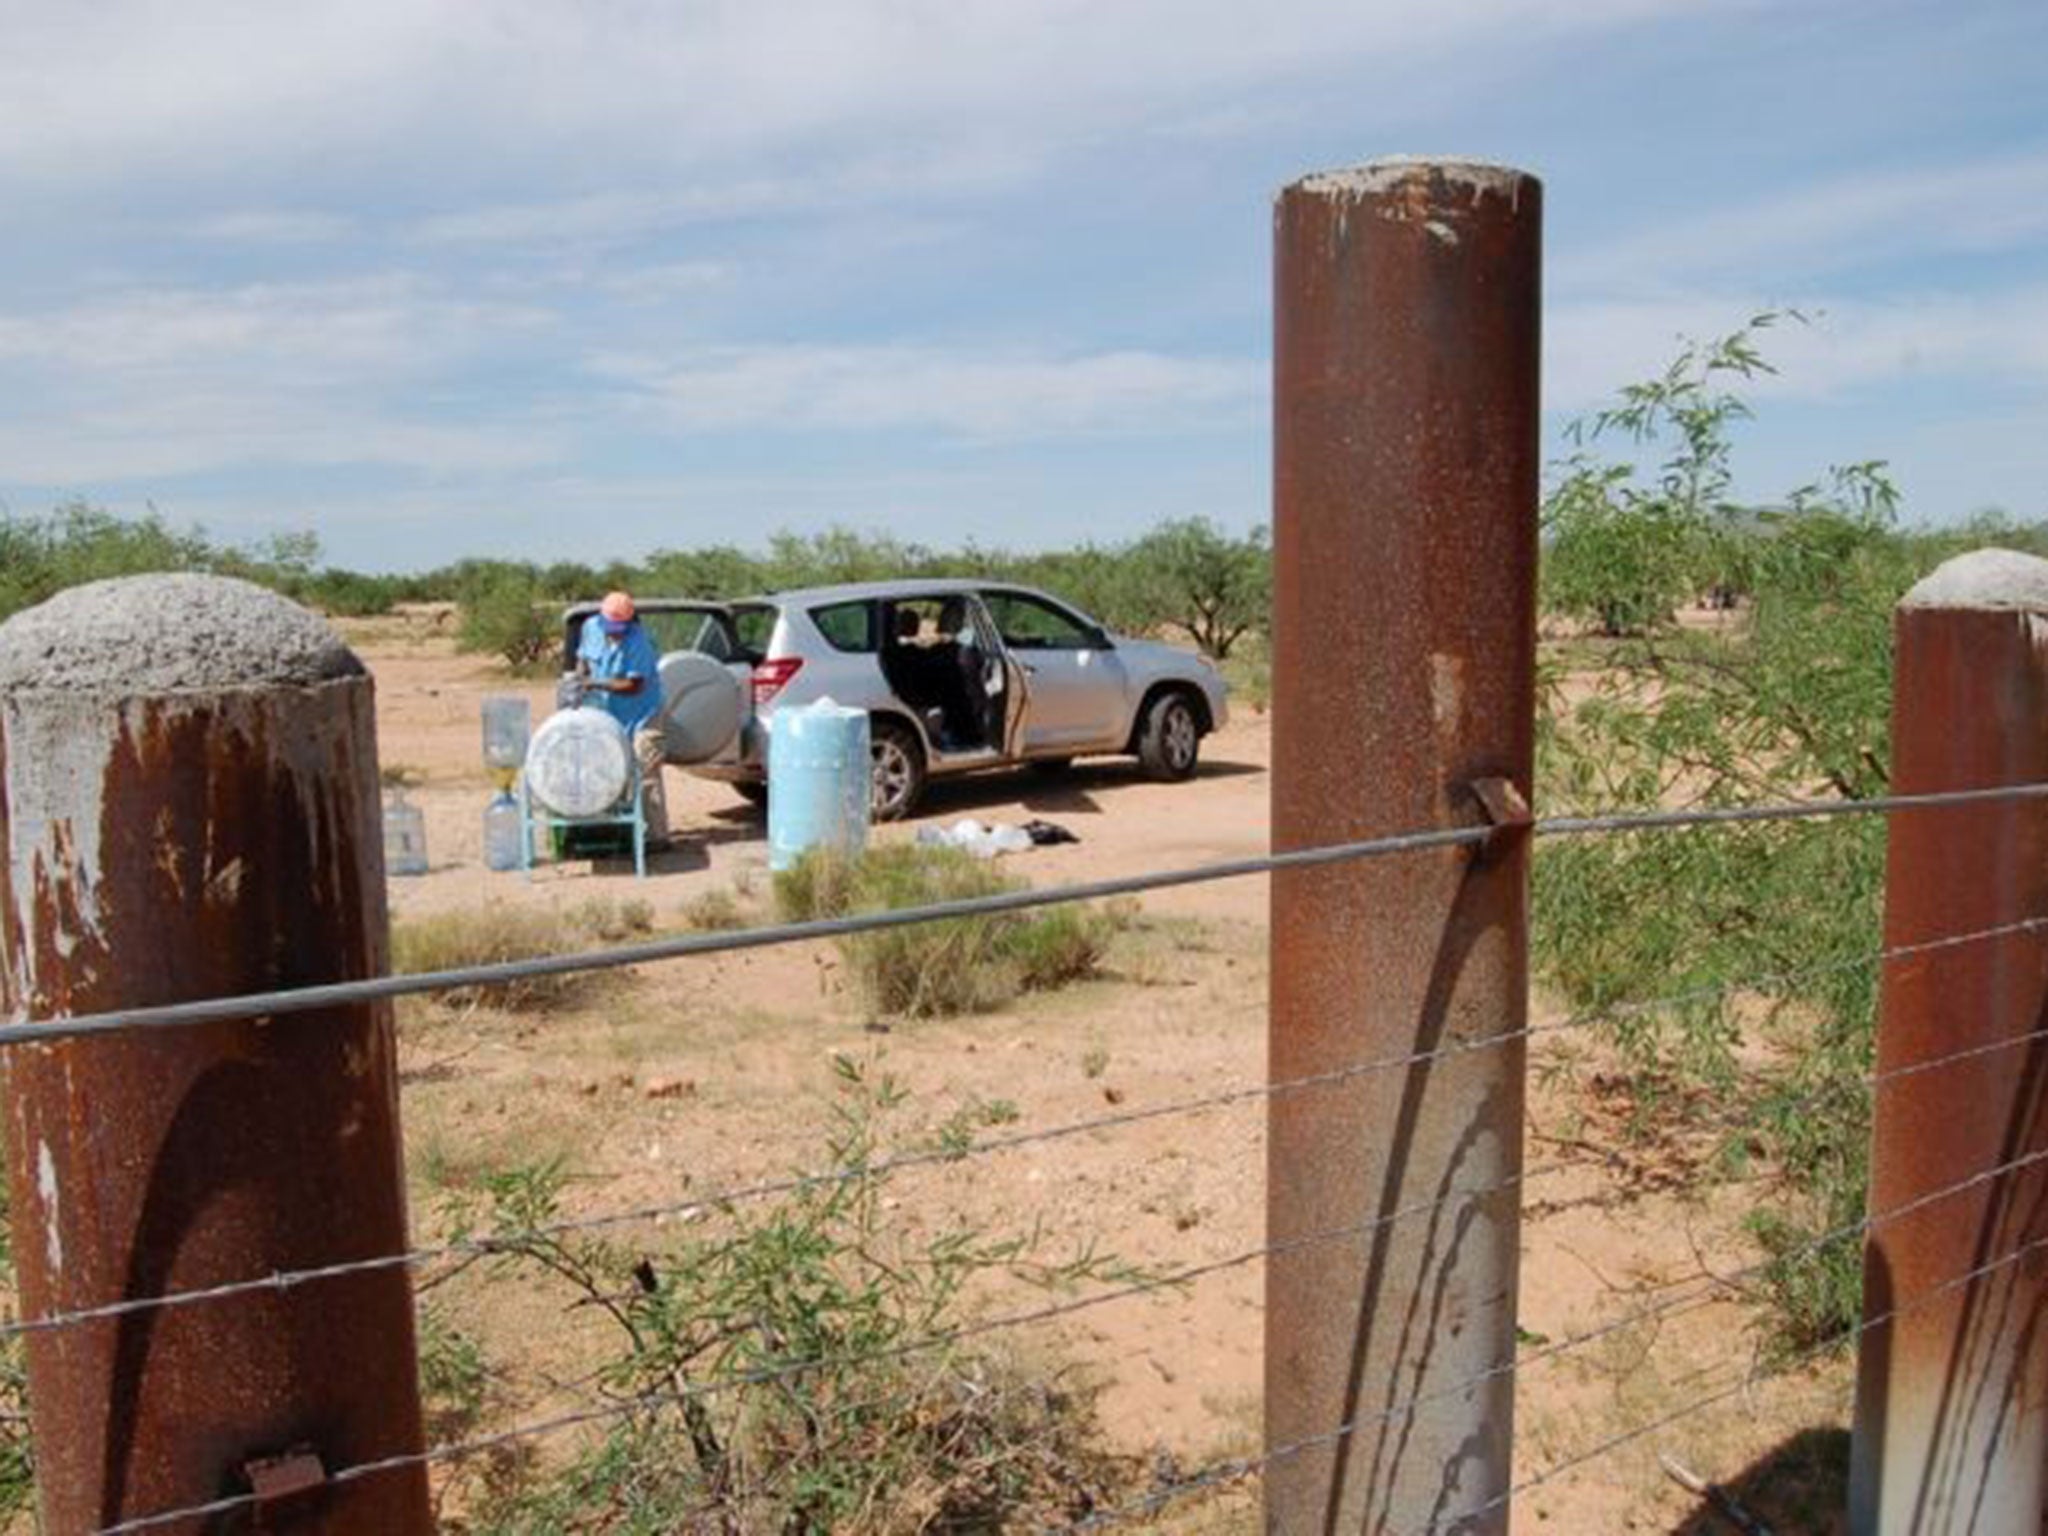 Mike Wilson with his water tank on the Mexican side of the border